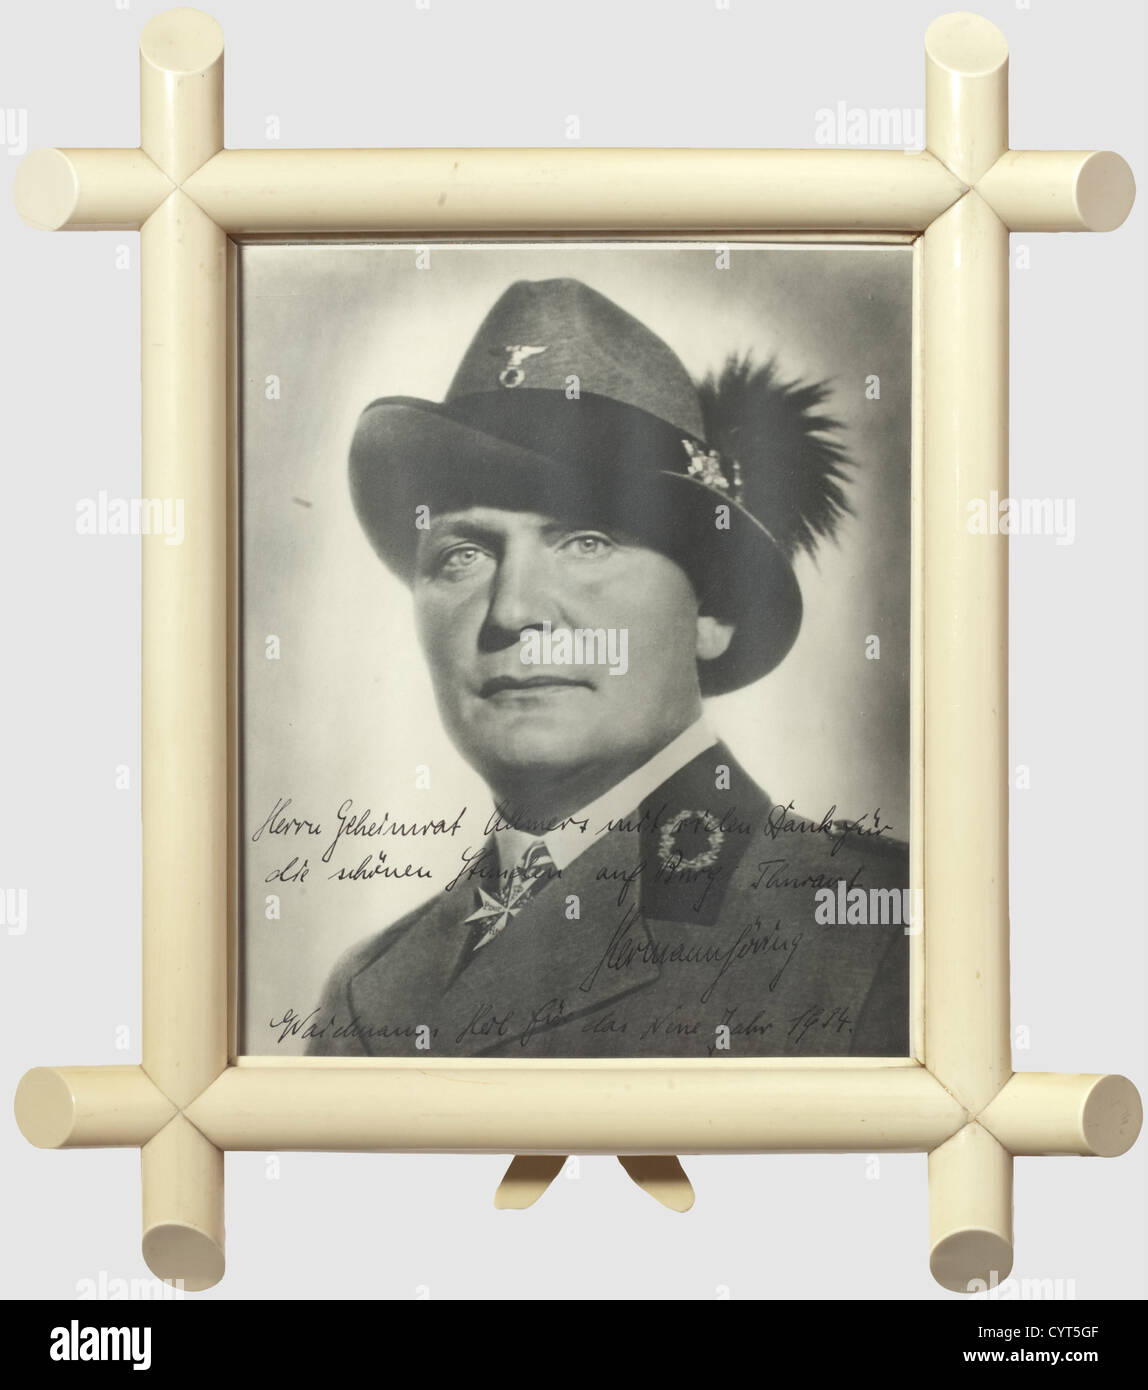 Hermann Göring, a large format photo dedicated to Privy Councillor Robert Allmers 1933/34 A portrait photograph of Göring in the hunting coat of the Reich hunting association wearing the Pour le mérite. There is a thick ink dedication on the lower edge, 'Herrn Geheimrat Allmers mit vielem Dank für die schönen Stunden auf Burg Thurant - Hermann Göring - Waidmanns Heil für das Neue Jahr 1934.' (To Privy Councillor Allmers with many thanks for the lovely hours at Thurant Castle - Hermann Göring - A hunter's greeting for the New Year 1934). Dimensions of photograph, Stock Photo